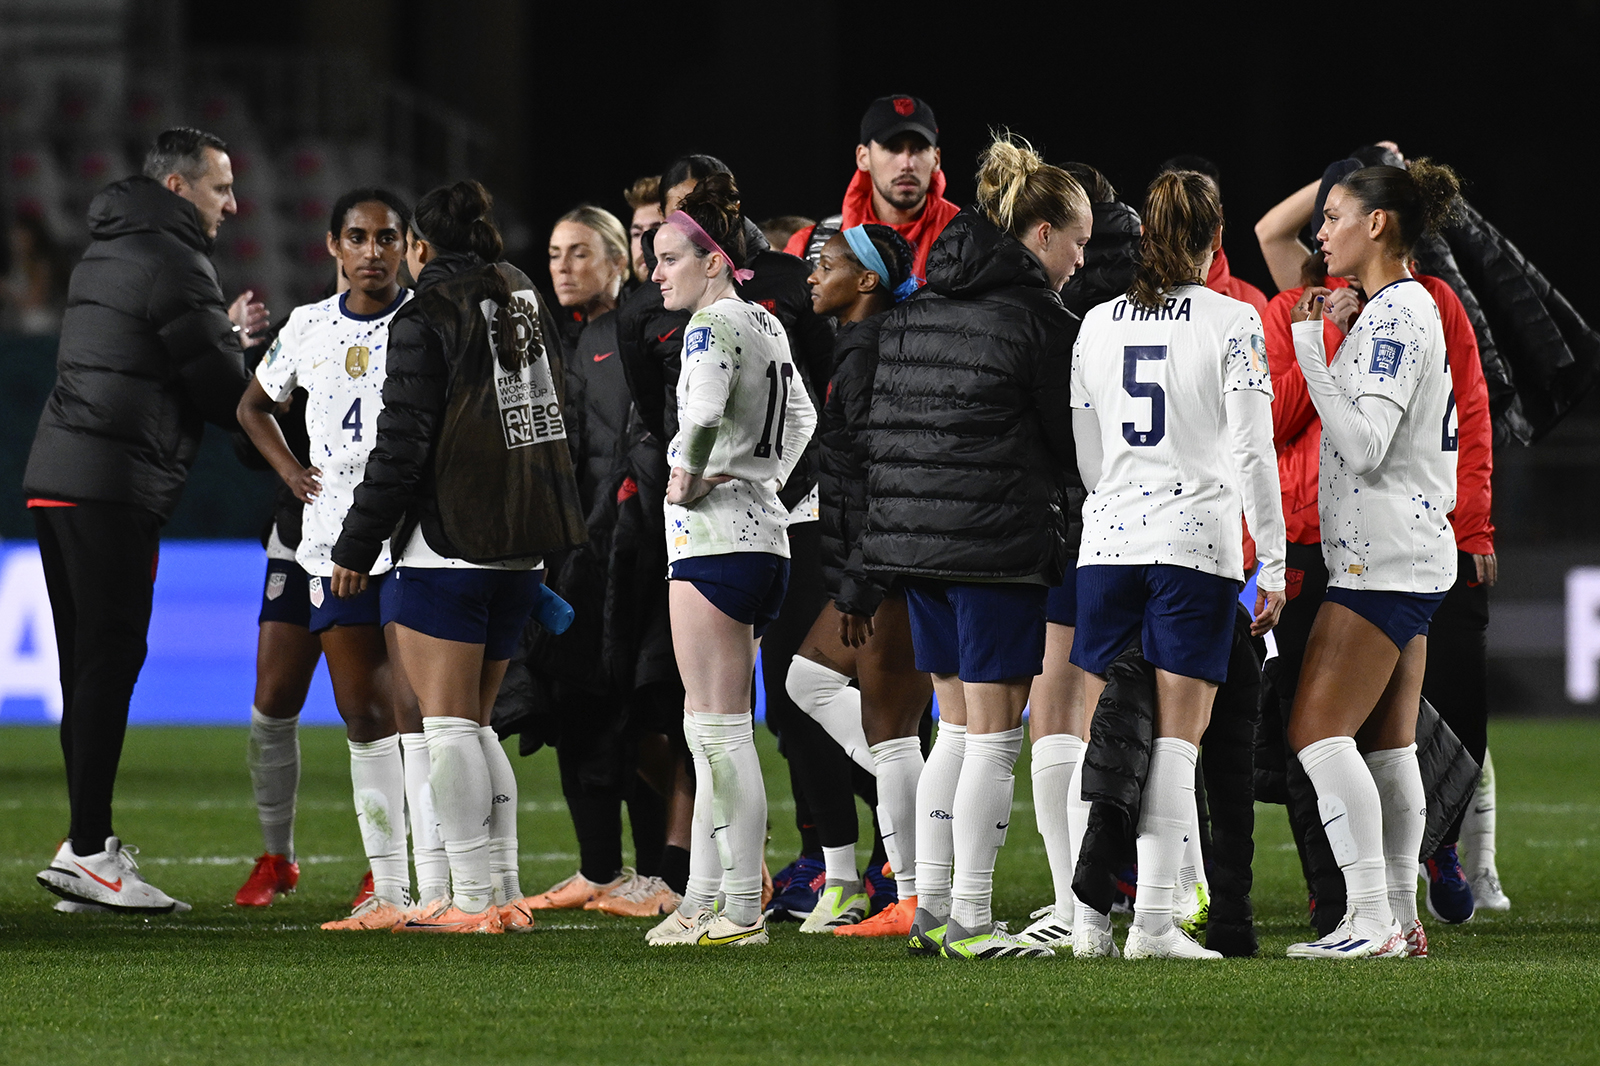 US players react following the Women's World Cup Group E soccer match between Portugal and the United States at Eden Park in Auckland, New Zealand earlier today.